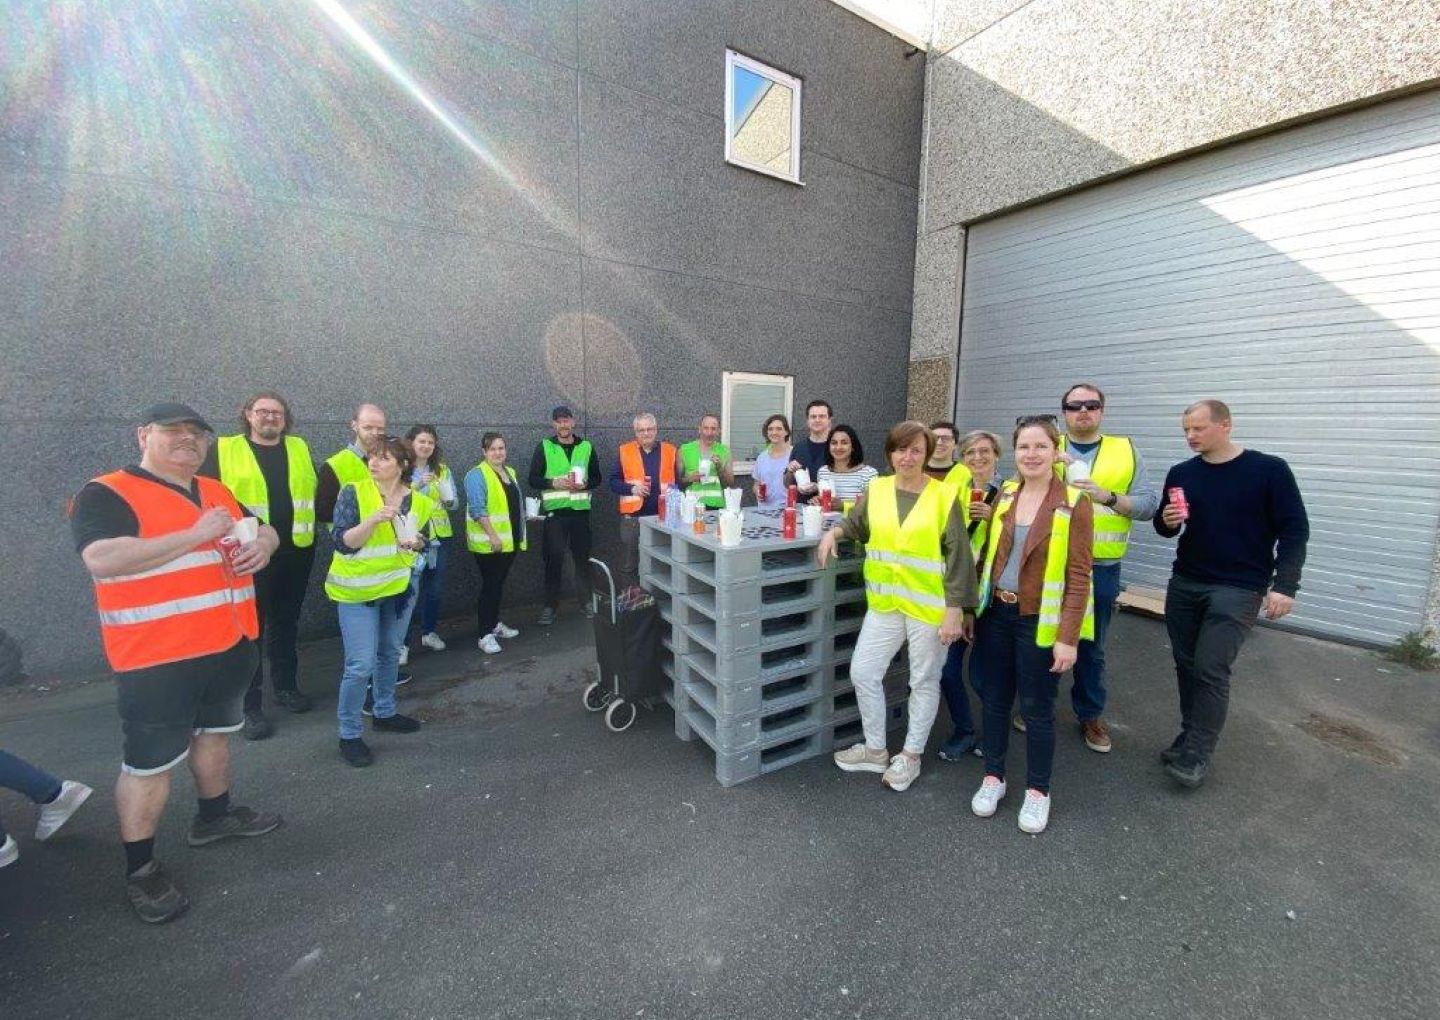 Together with 150 other volunteers, we took part in the litter clean-up action on our INDUSTRIAL SITE DE PRIJKELS under a bright sunshine.  Afterwards, everyone was offered a free pasta by the non-profit association De Prijkels, provided by Very Food Catering.